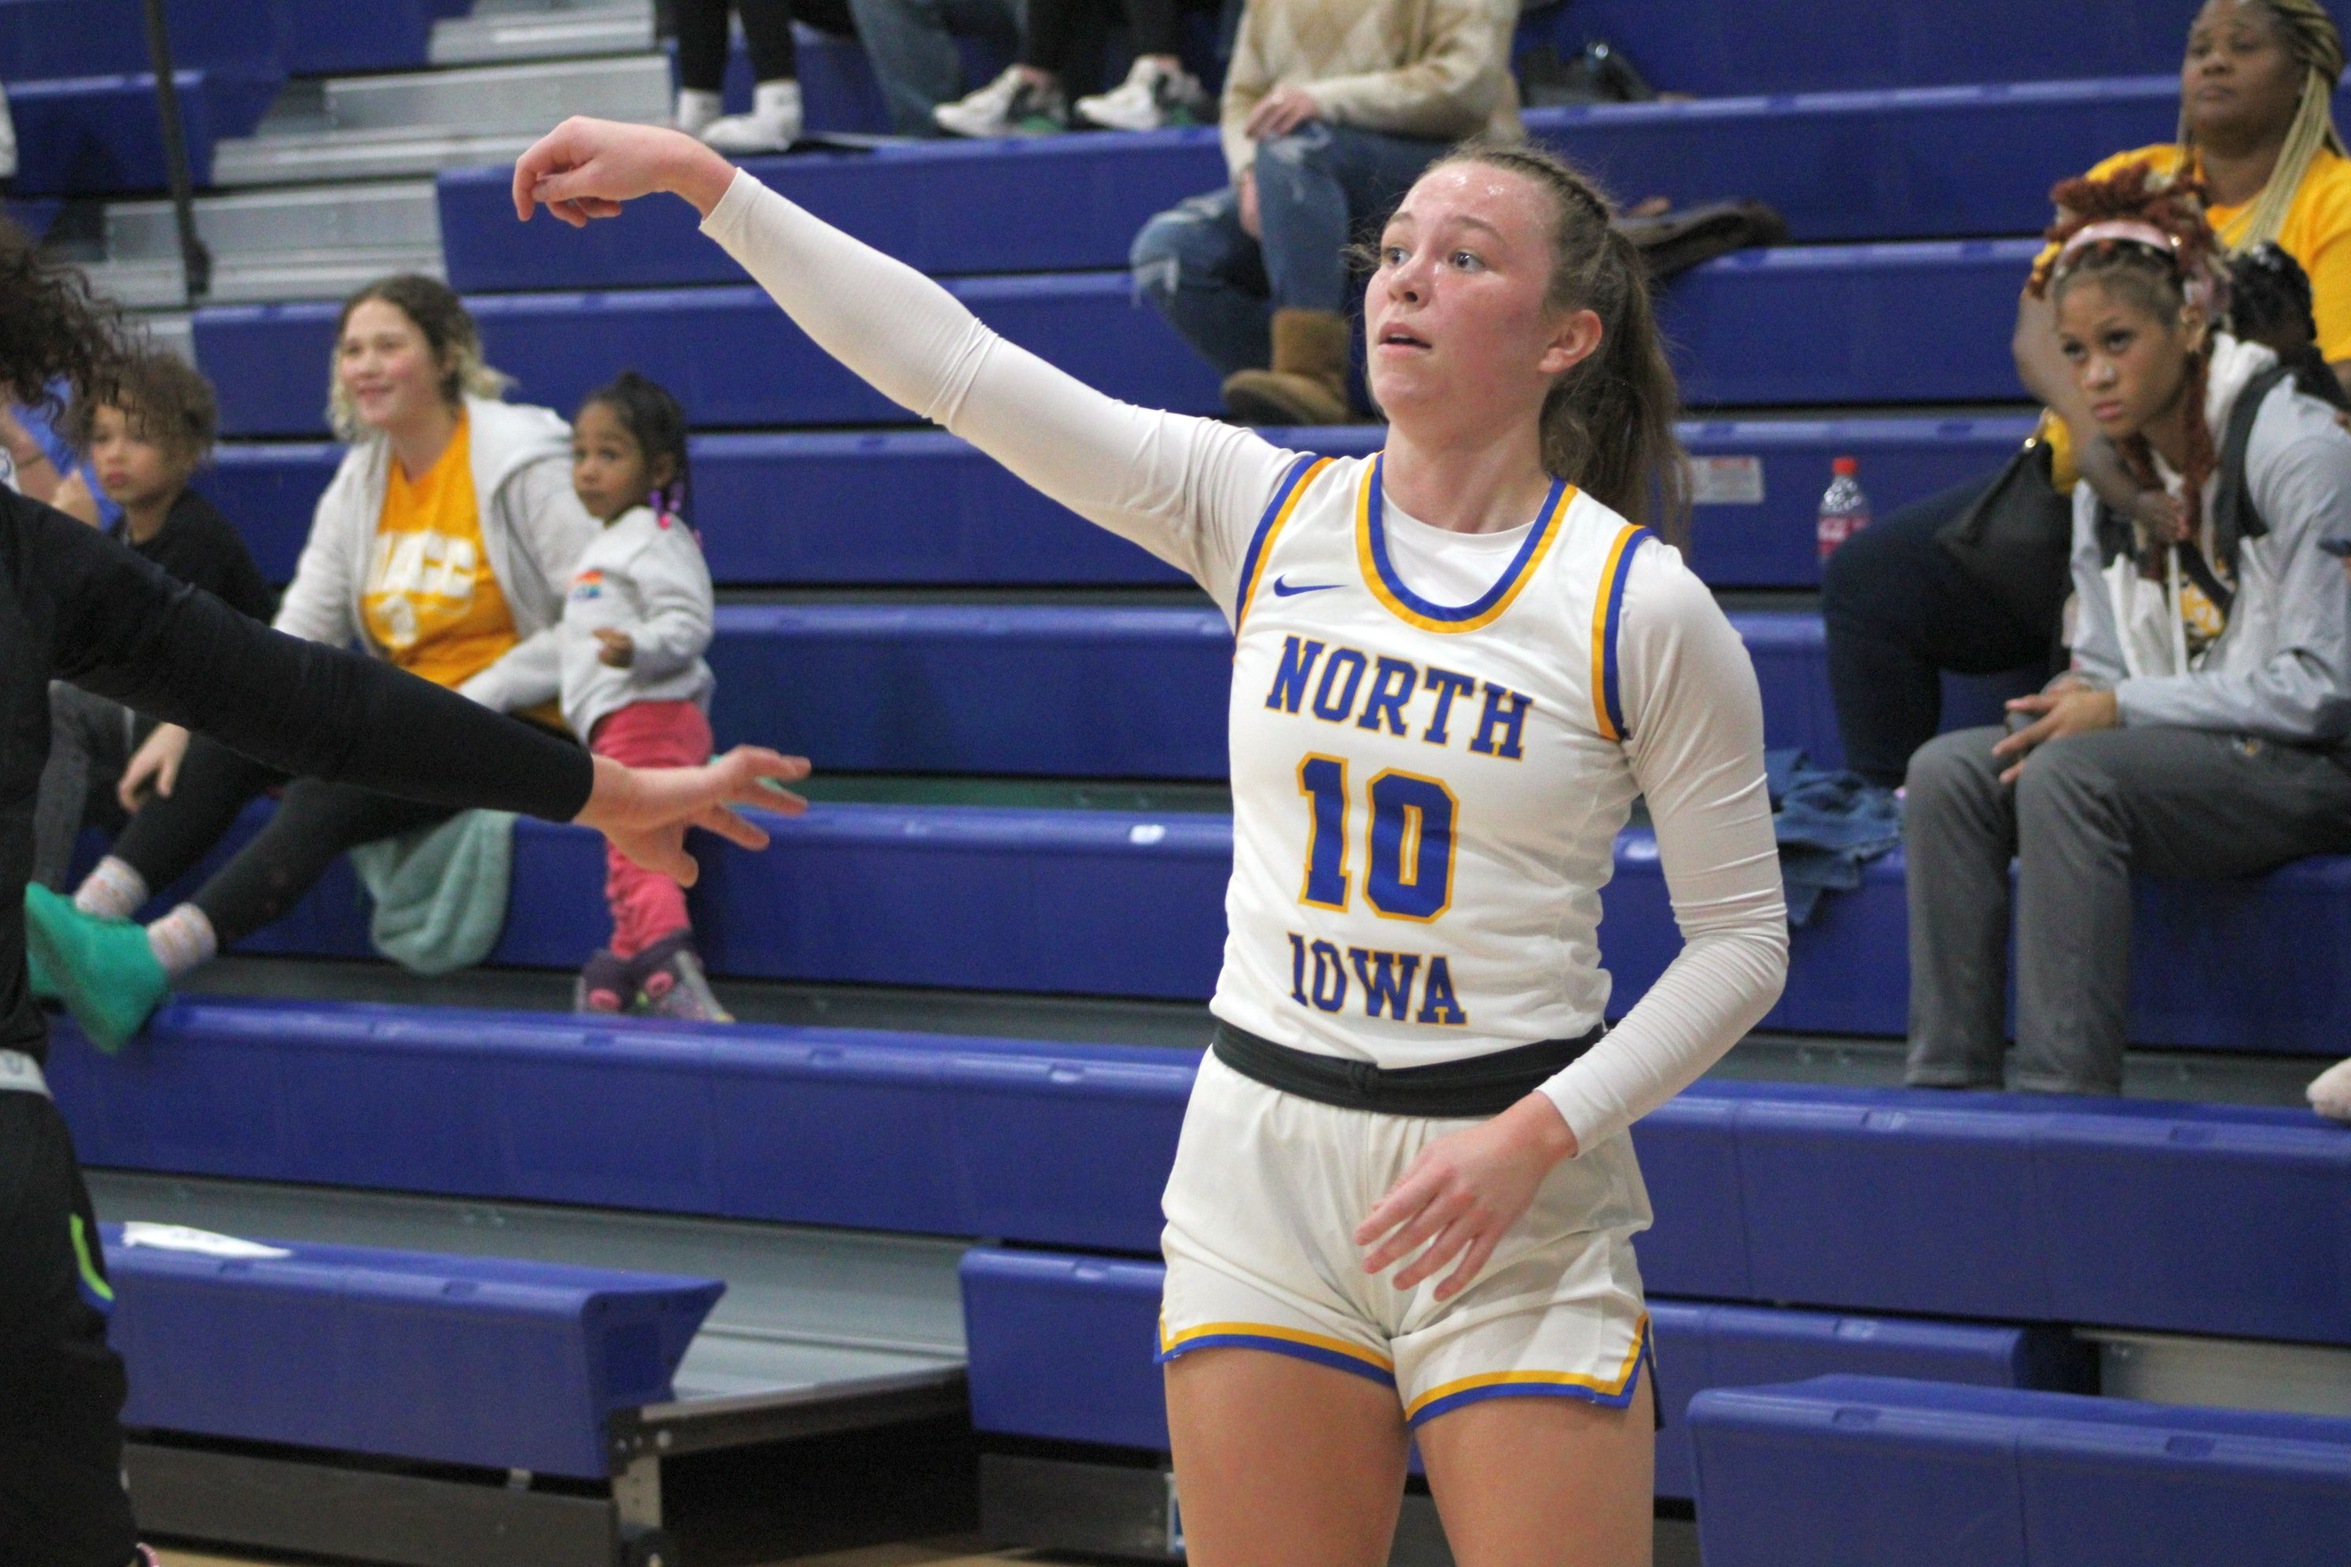 Keeley Steele led the NIACC women's basketball team with 23 points in Friday's win over Bryant & Stratton at the Konigsmark Klassic.